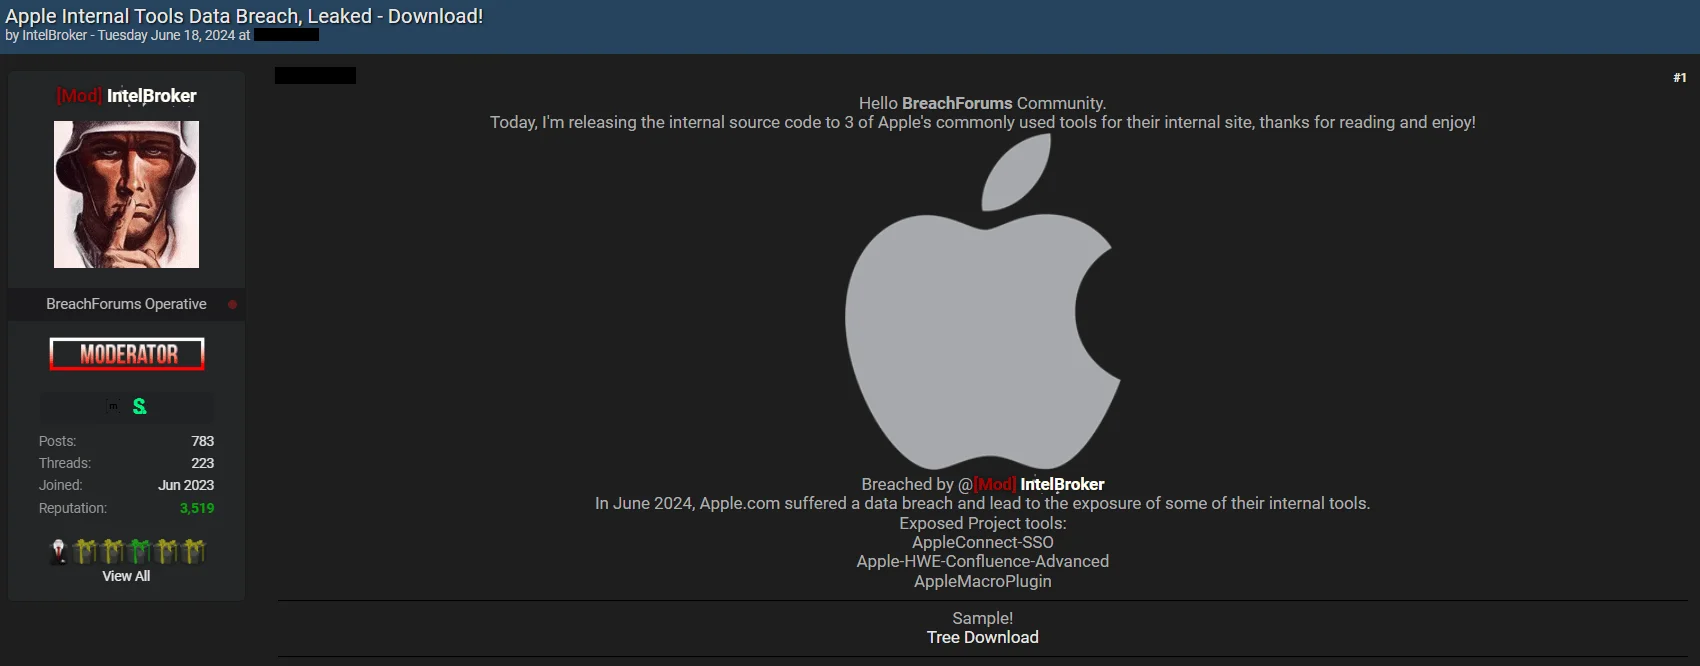 The post about Apple Internal Tools Breach